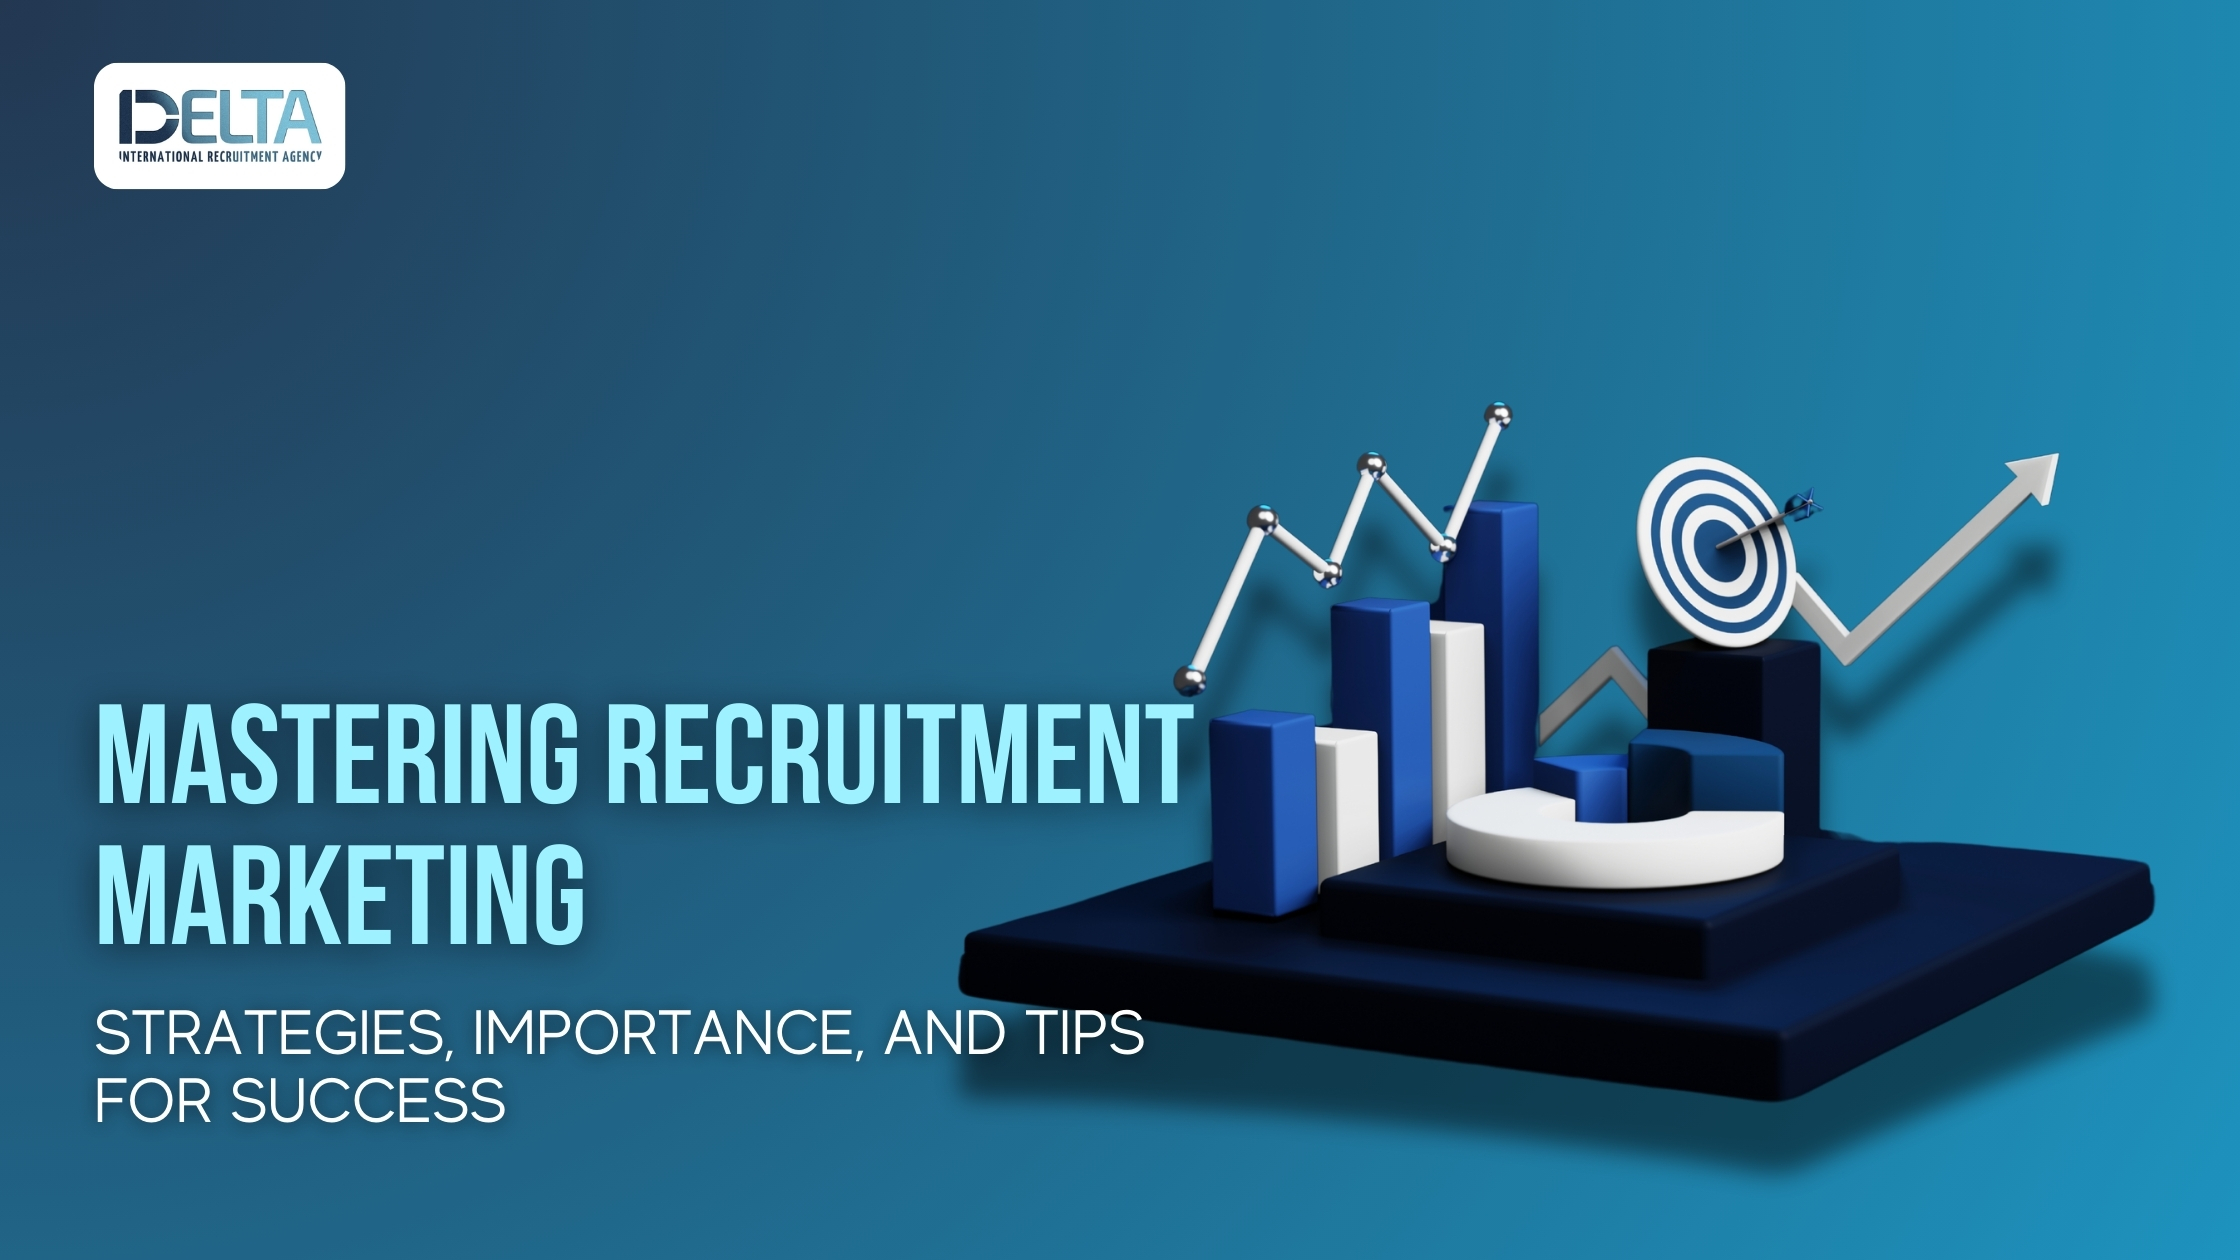 Mastering Recruitment Marketing: Strategies, Importance, and Tips for Success